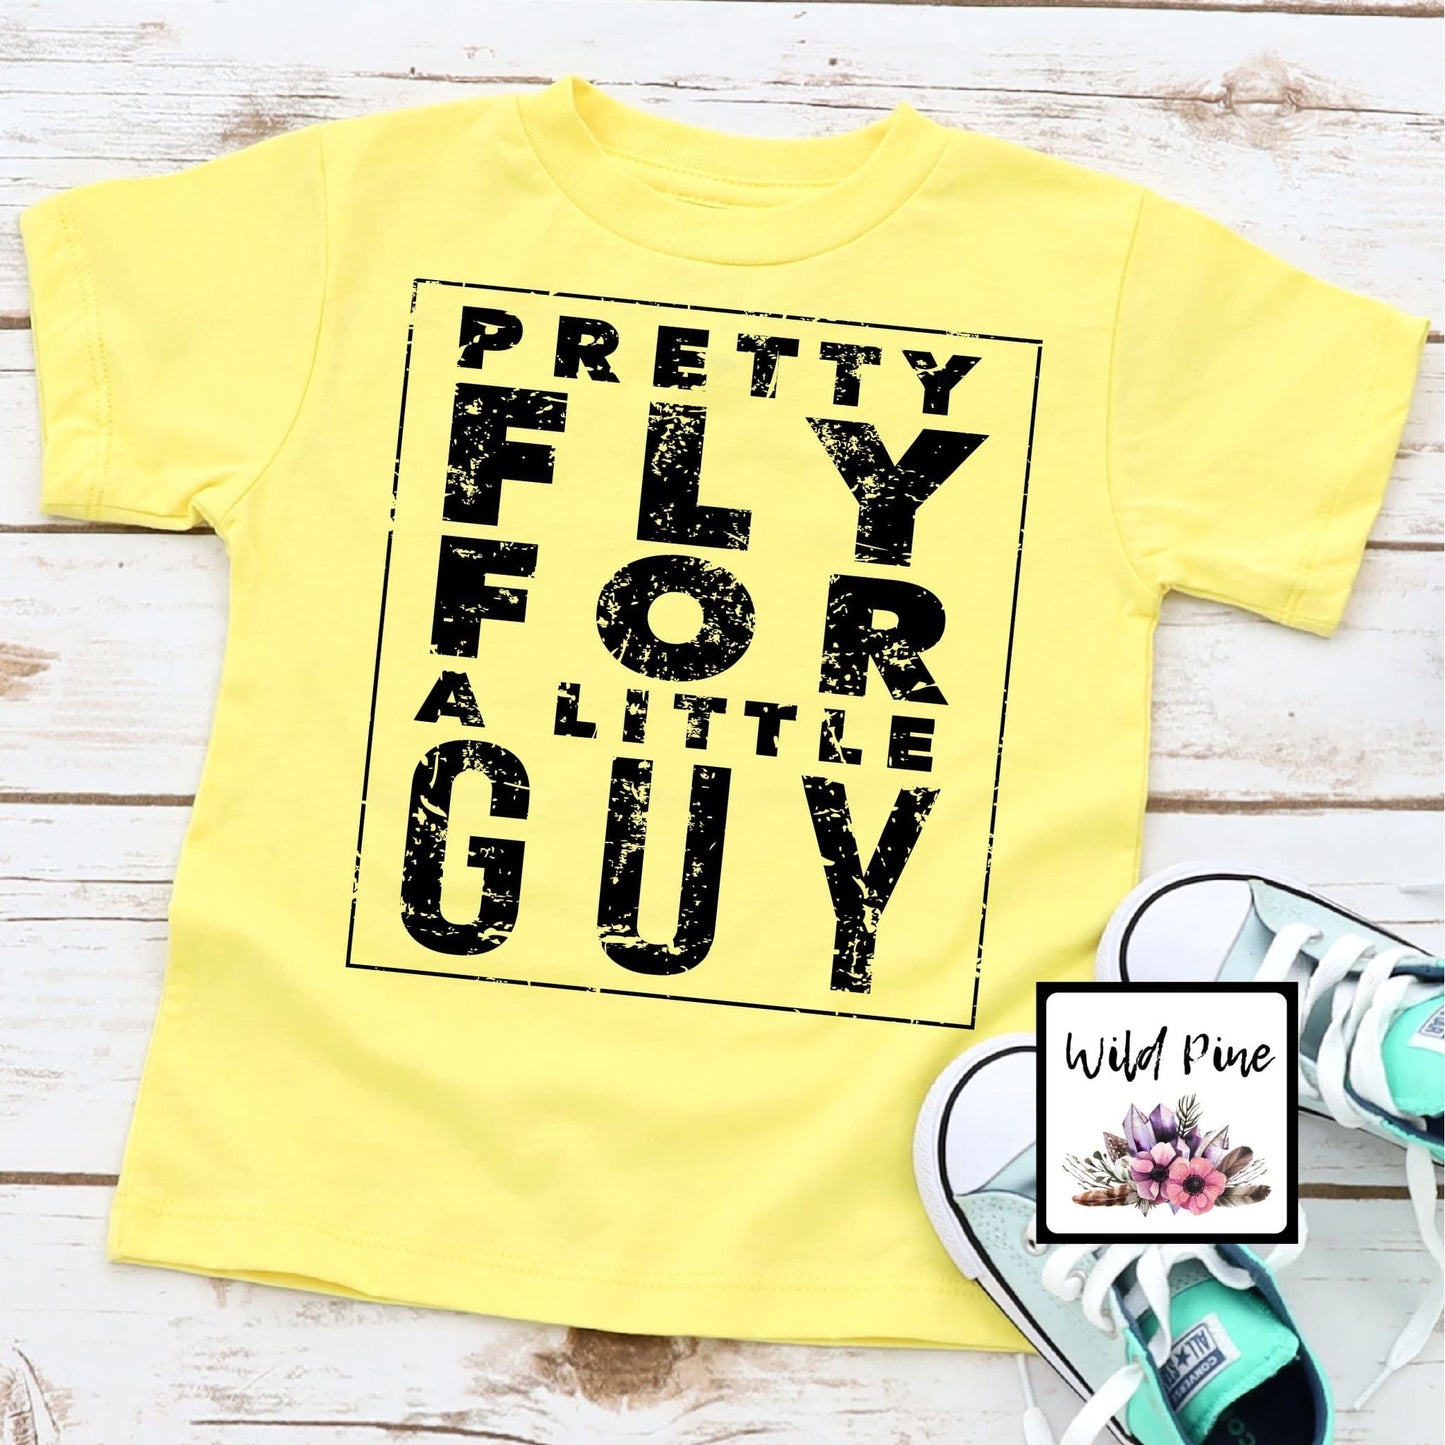 Pretty Fly For a Little Guy- YOUTH